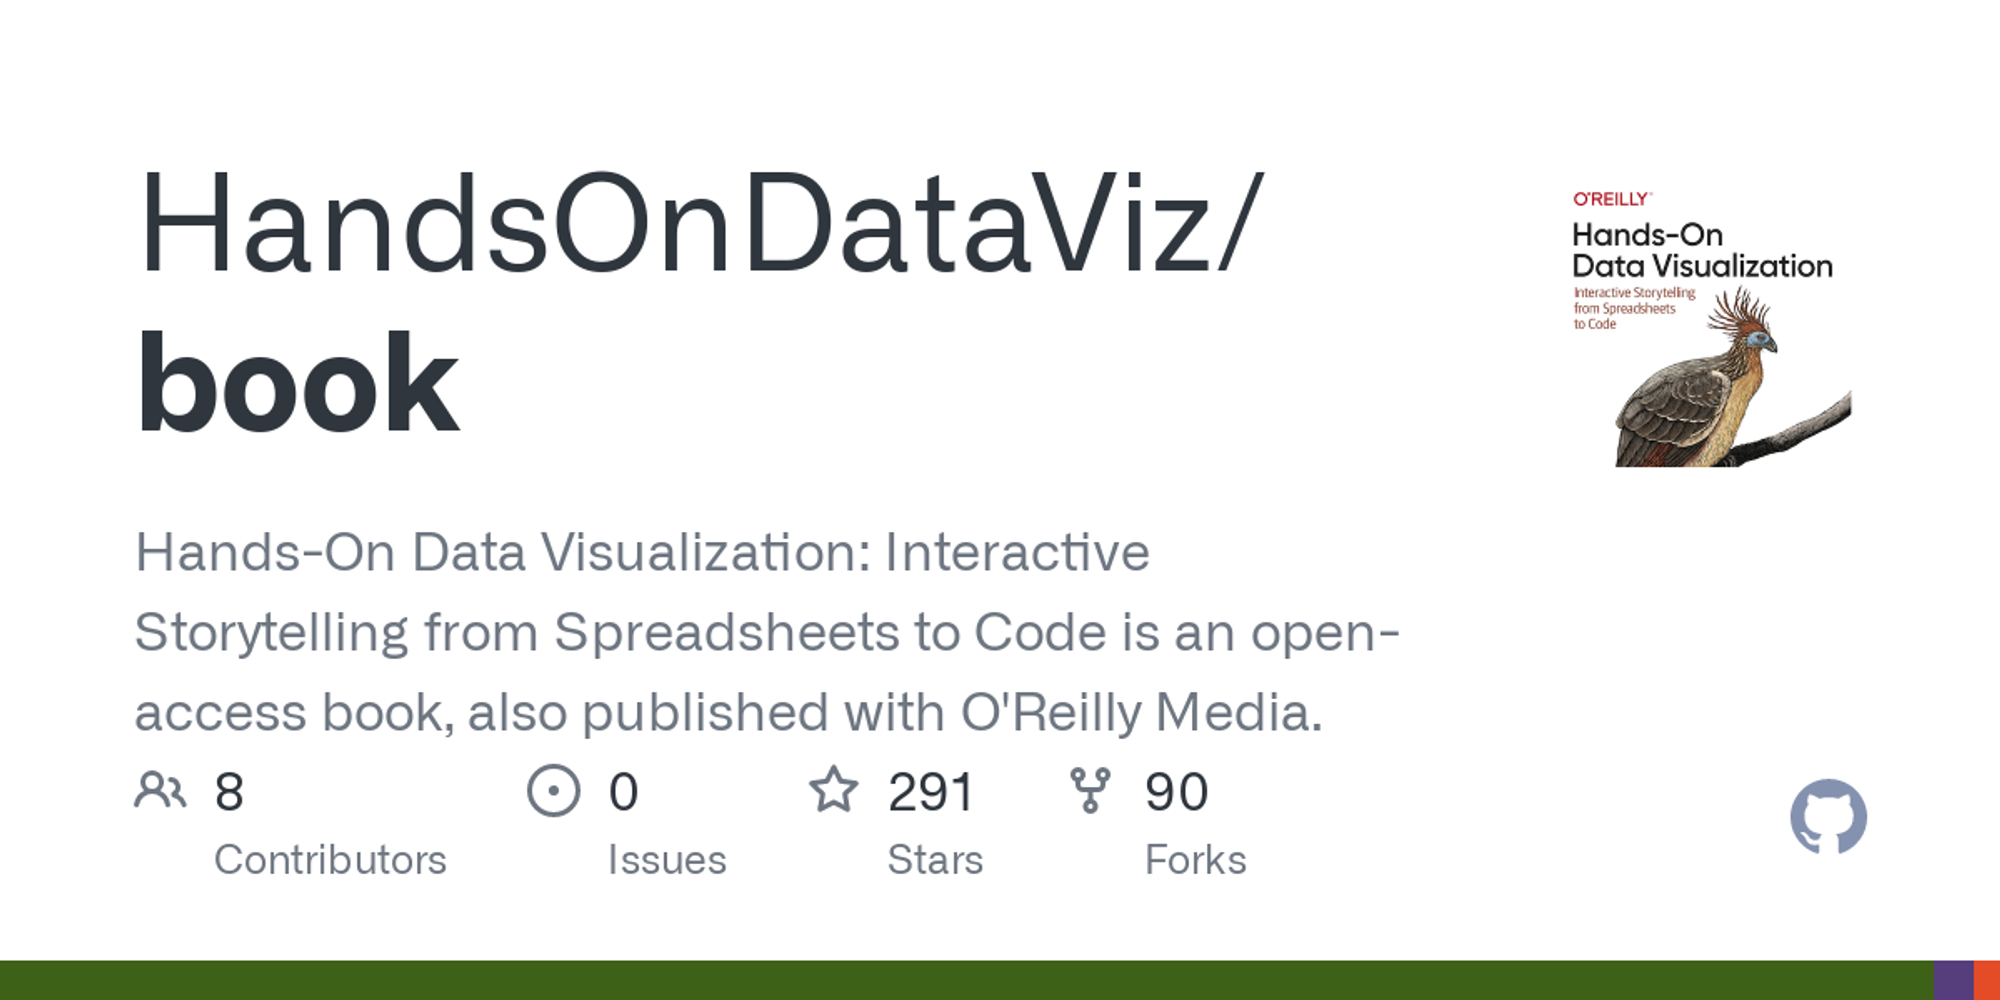 GitHub - HandsOnDataViz/book: Hands-On Data Visualization: Interactive Storytelling from Spreadsheets to Code is an open-access book-in-progress, under contract with O'Reilly Media.